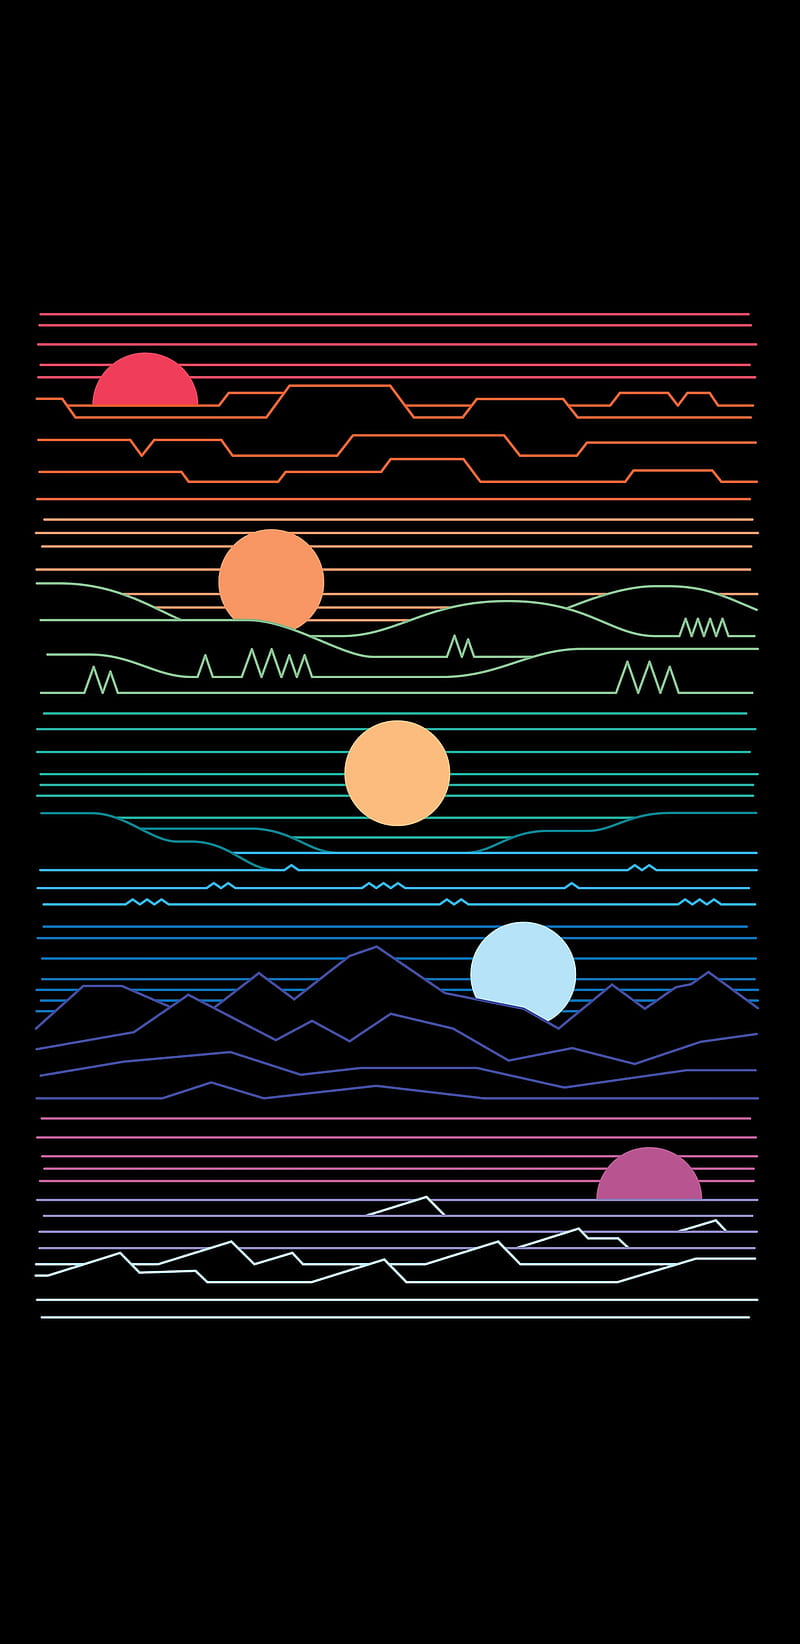 A colorful sunset scene with mountains and waves - Moon phases